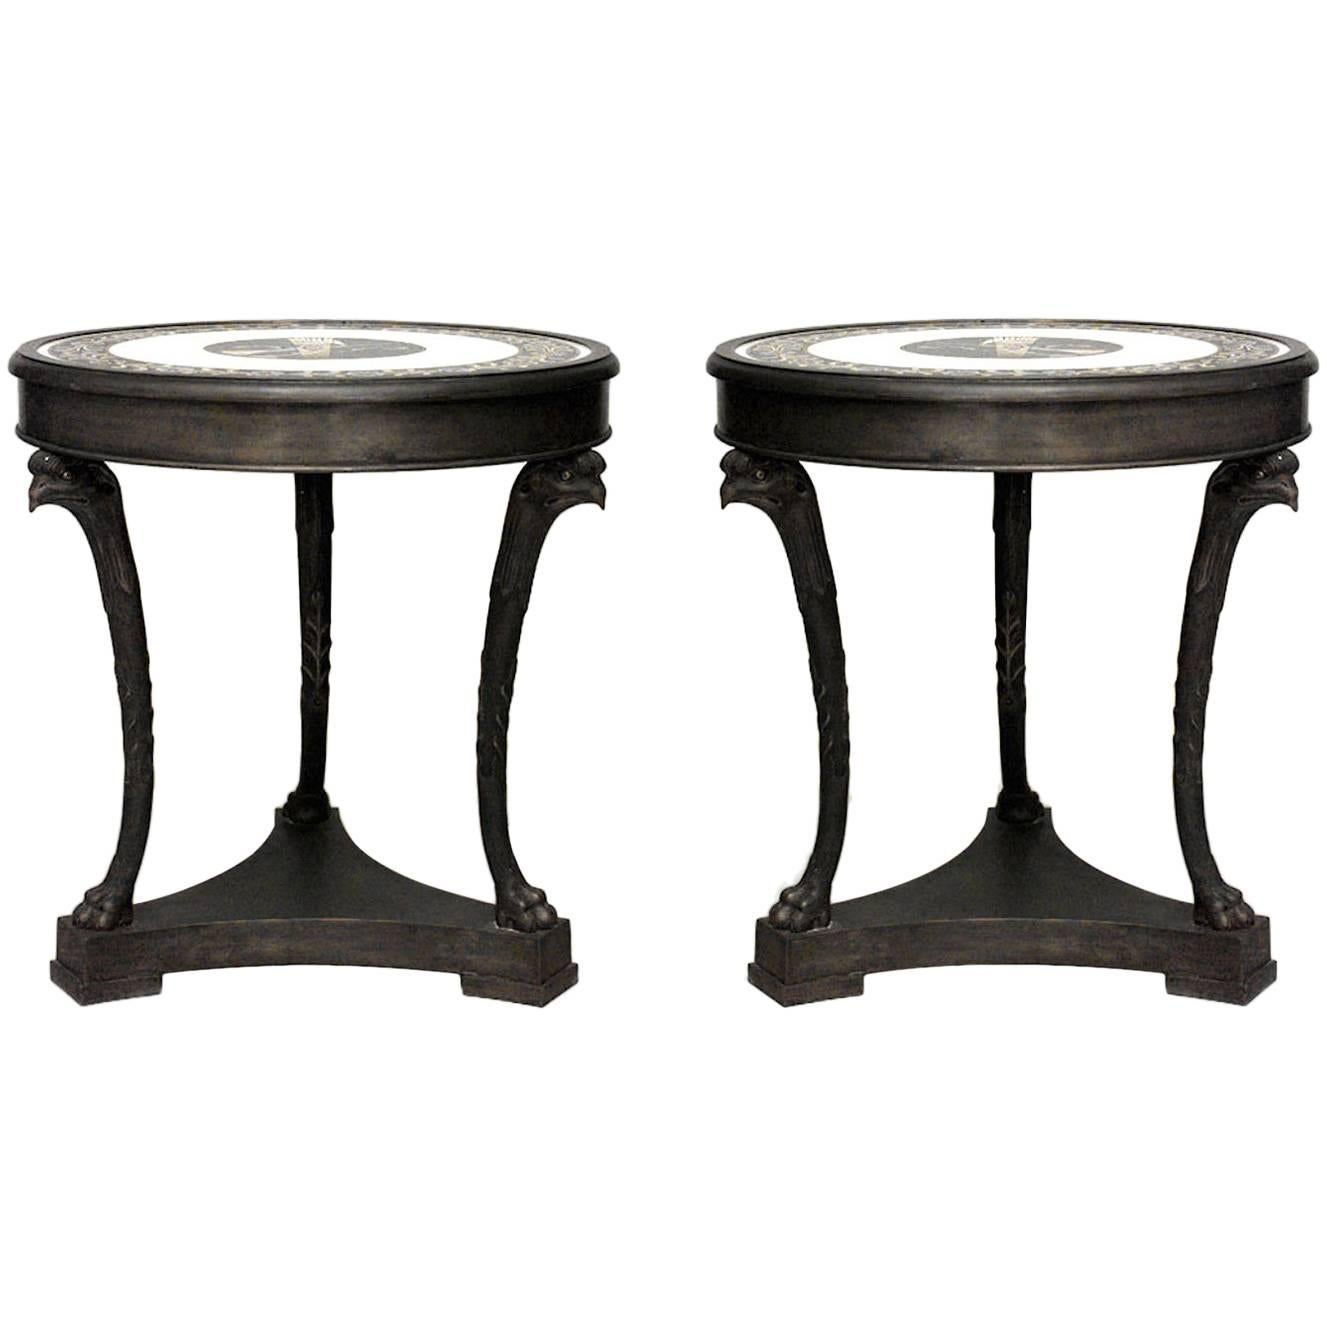 Pair of French Empire Style Round Bronze Gueridon Tables